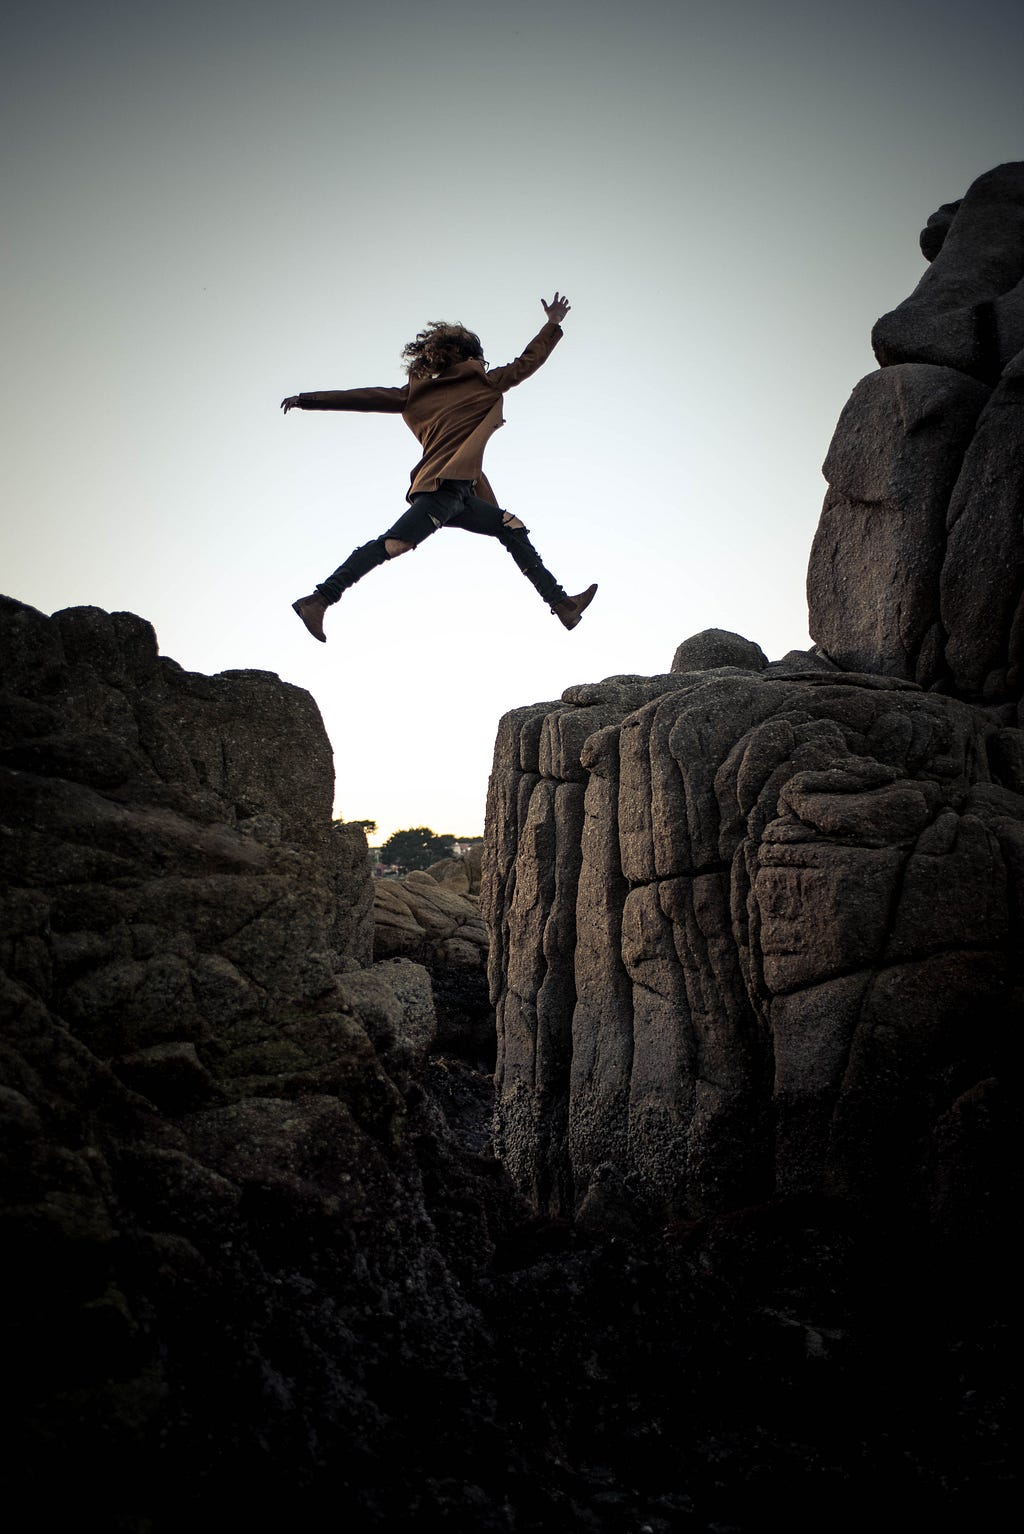 human jumping from one cliff to another, Photo by Sammie Chaffin on Unsplash